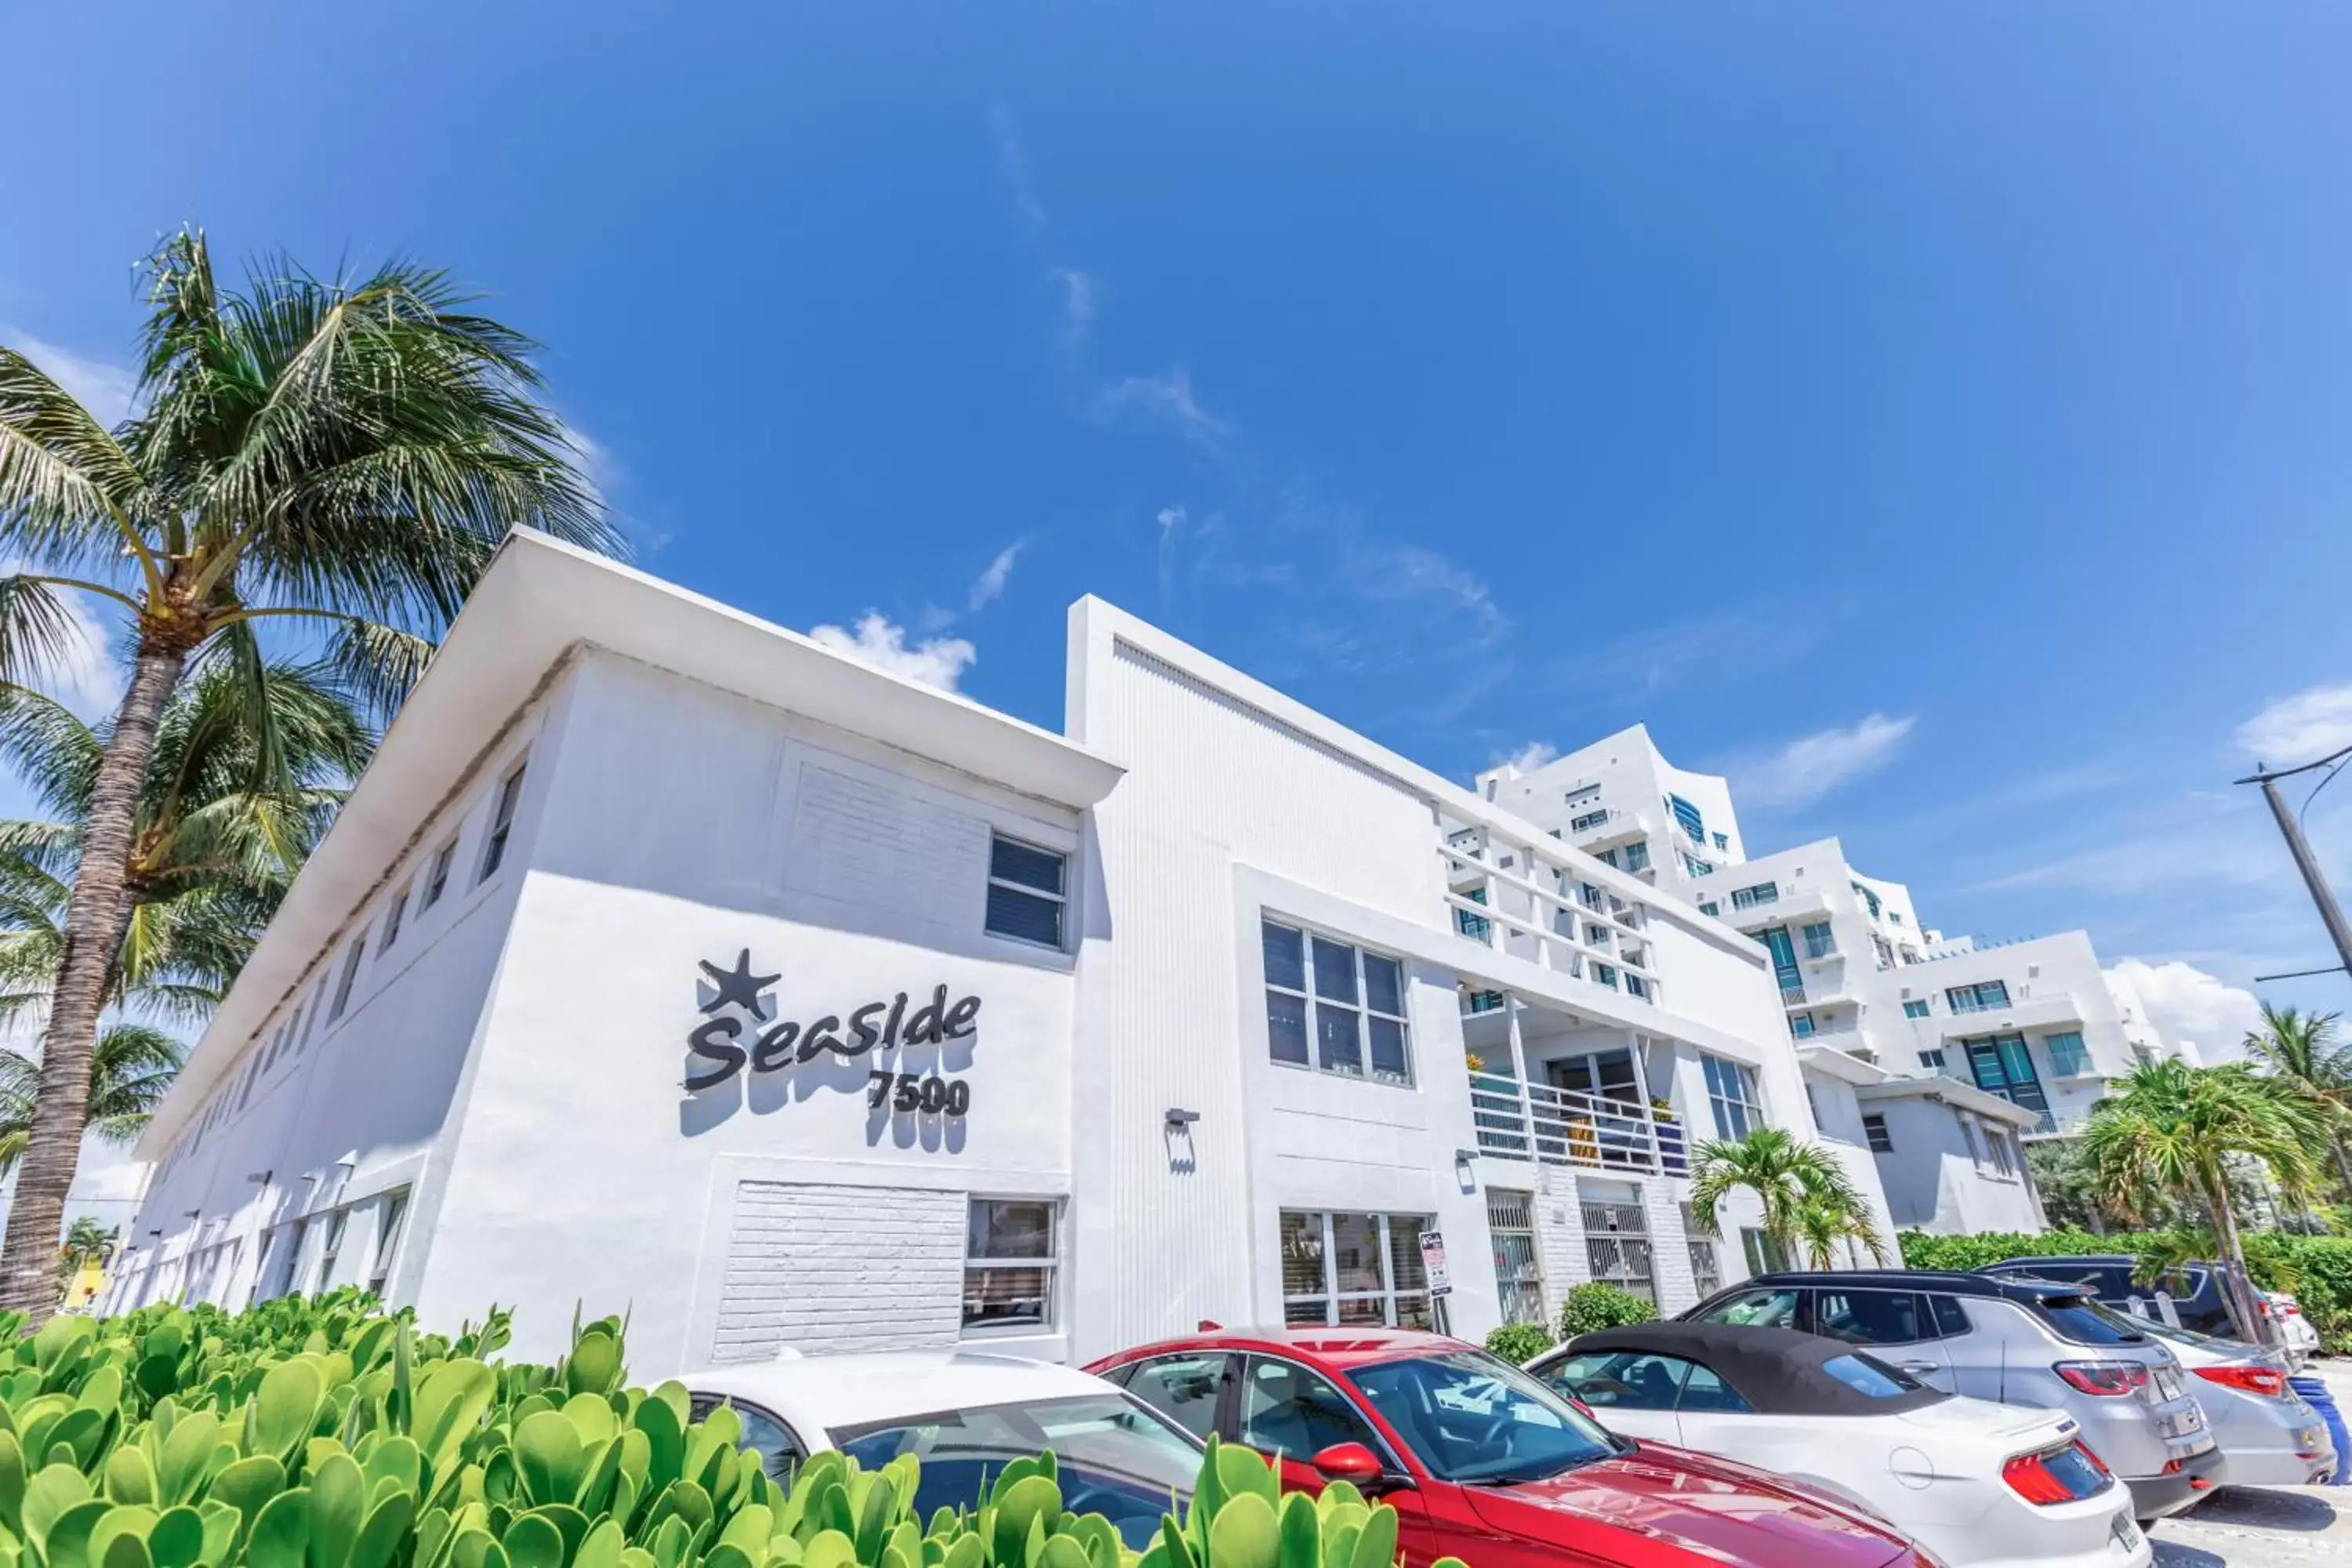 Property Building in Seaside All Suites Hotel